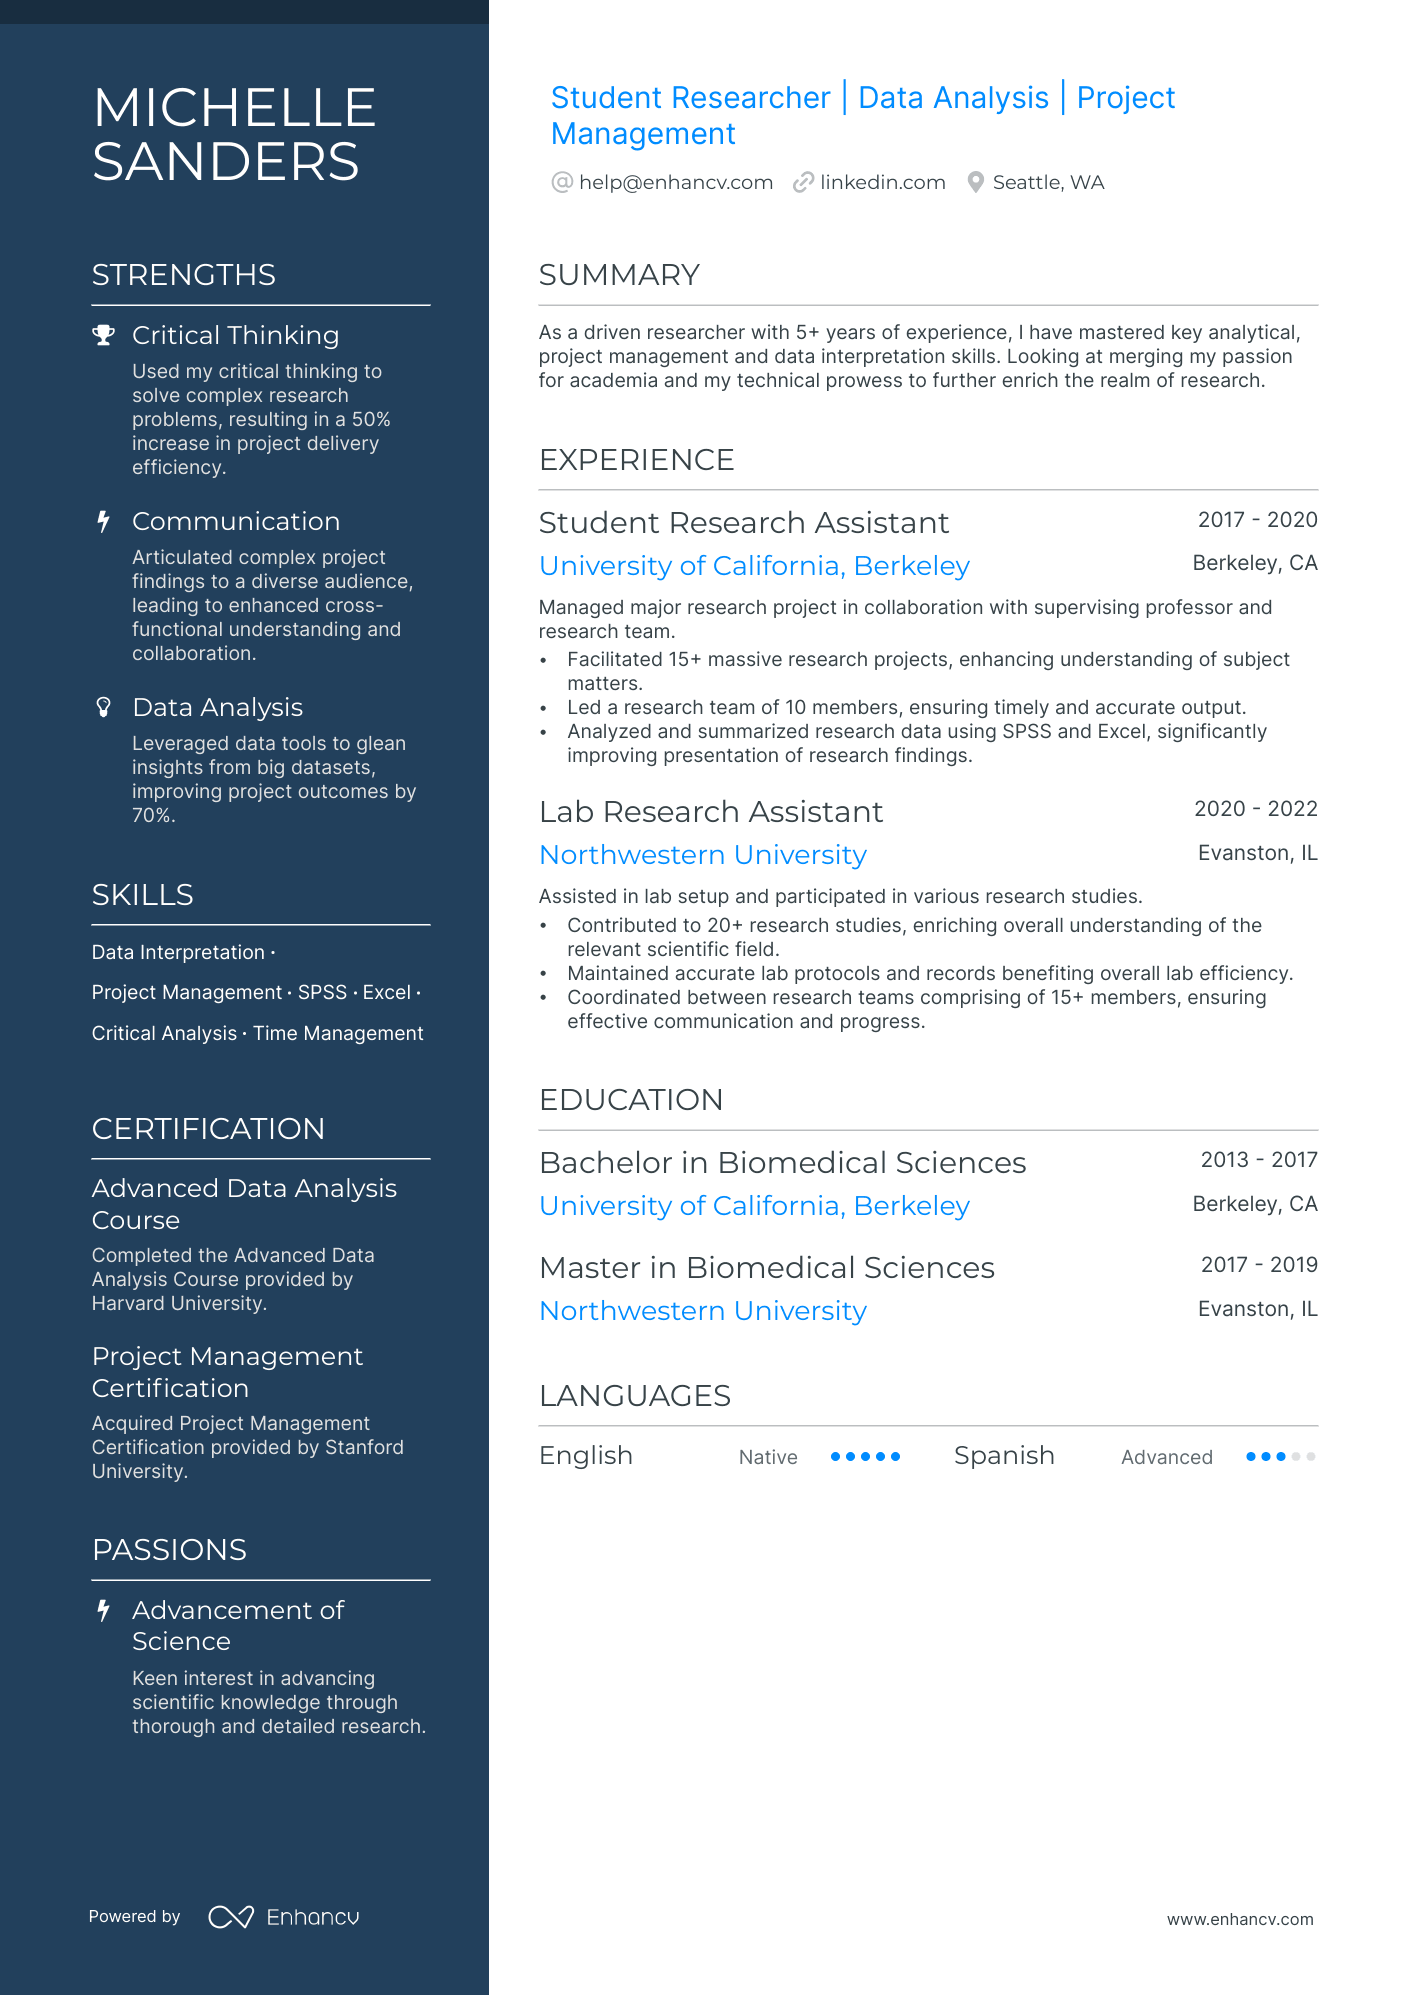 Student Researcher resume example